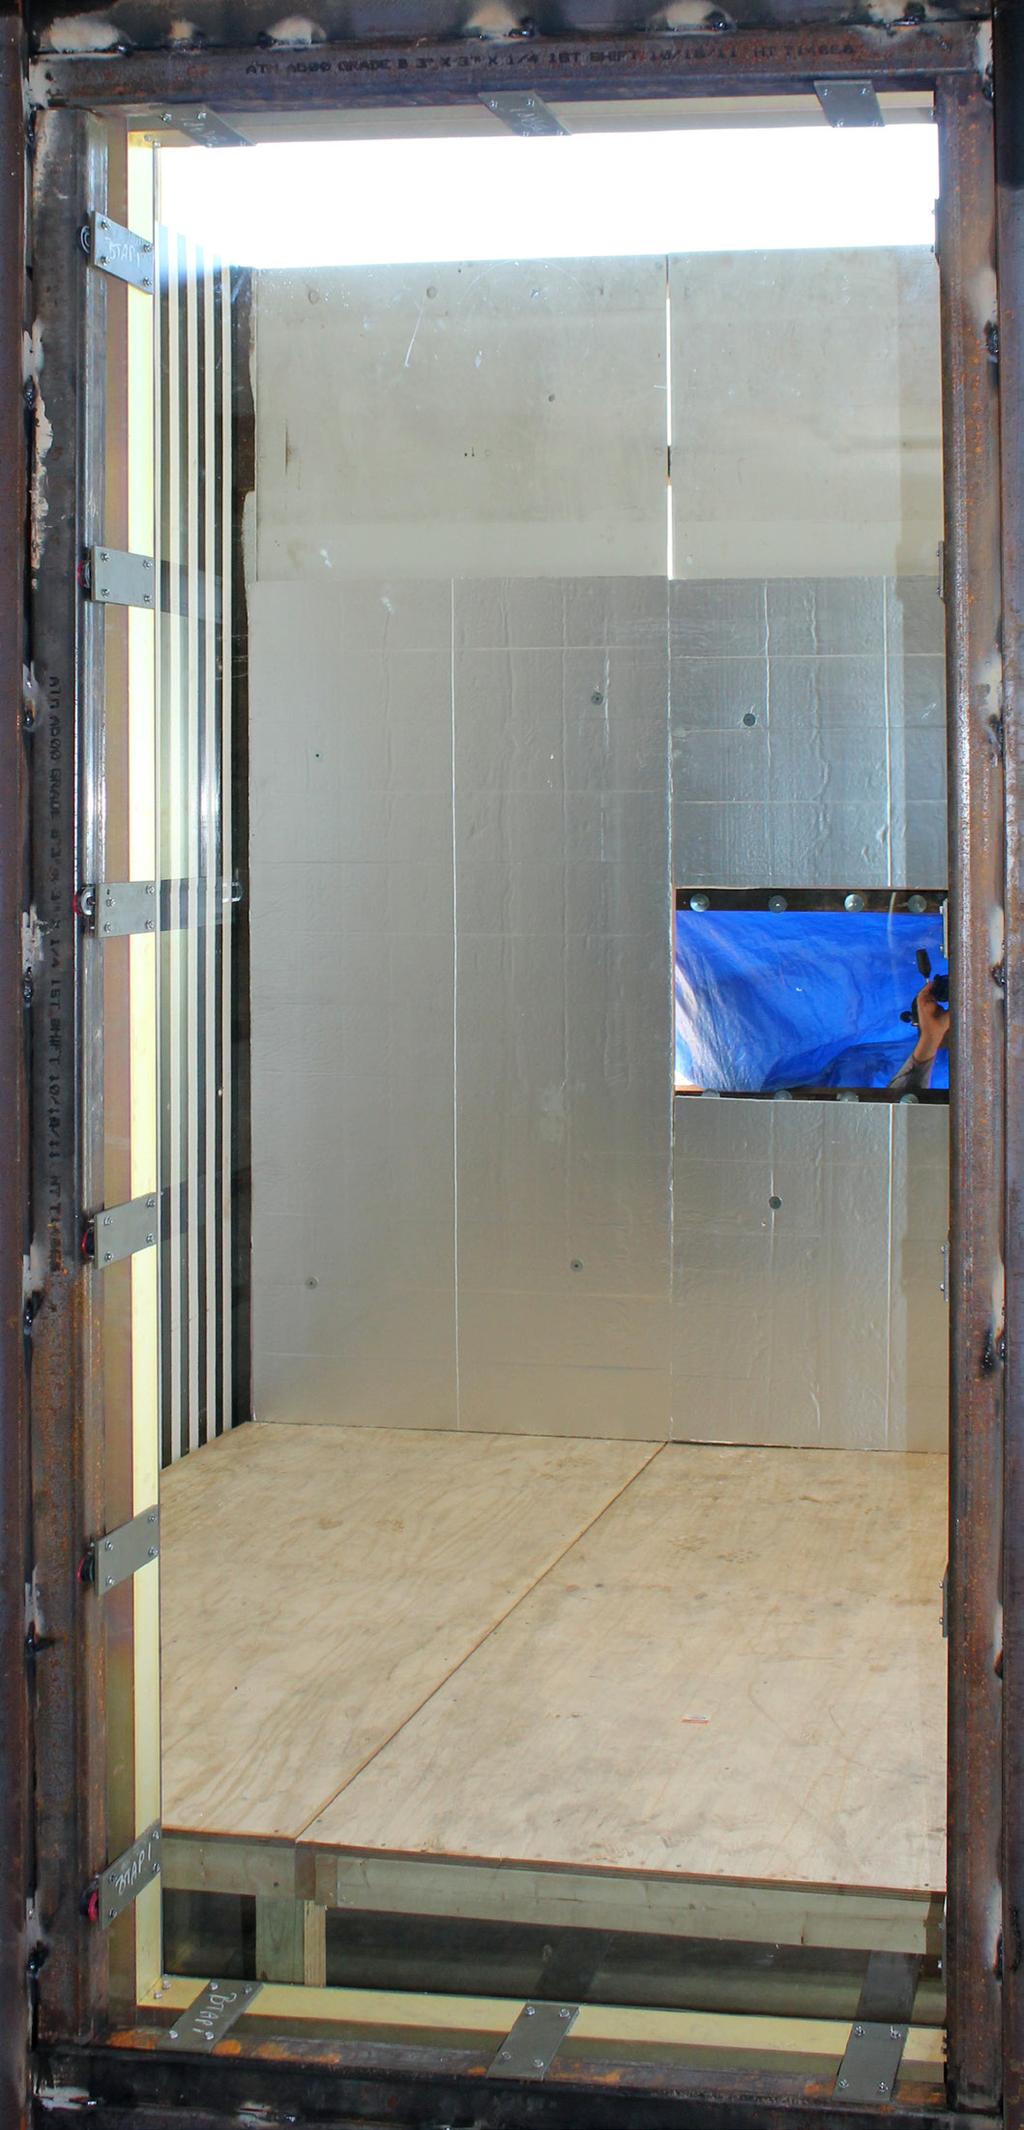 Baffles on the test chamber were used to minimize the effects of reloading by reflections inside the chamber. RESULTS The tests were run in accordance to ASTM F 6.